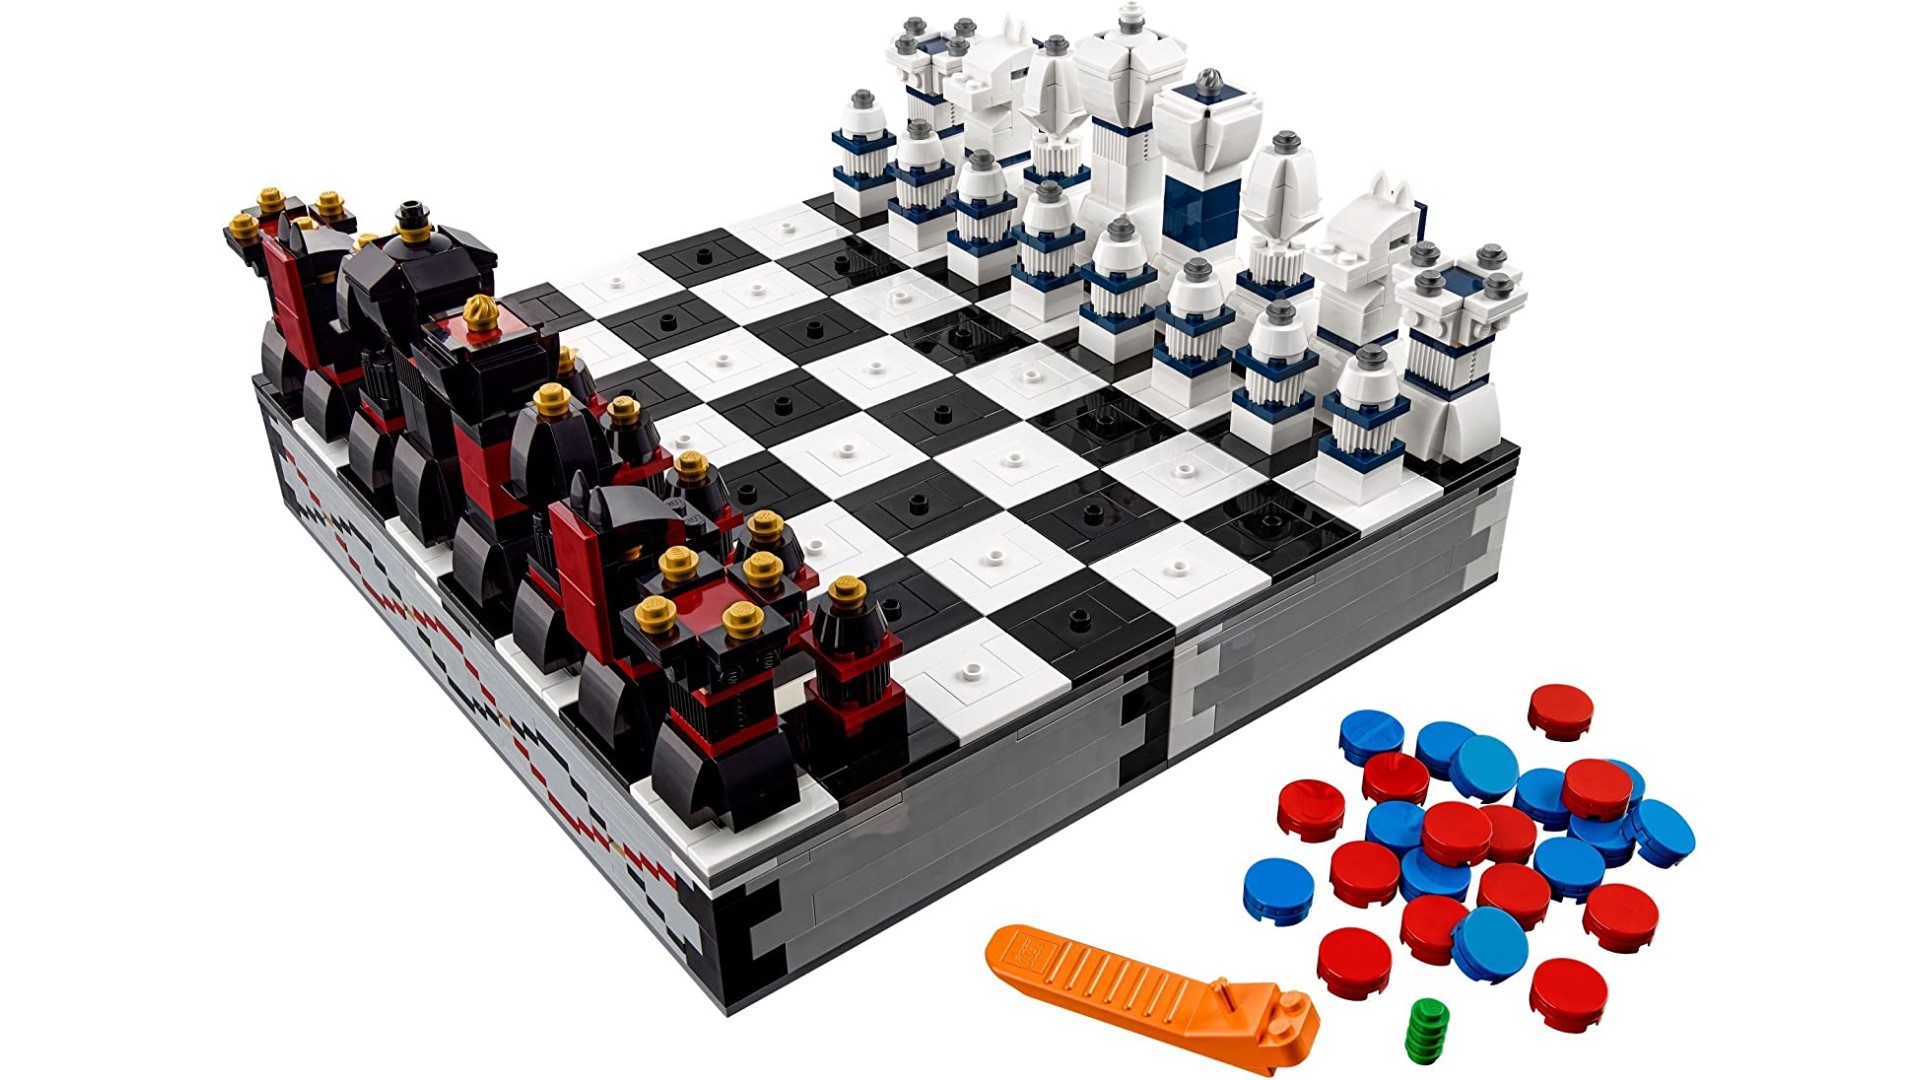 LEGO board games - Iconic chess set